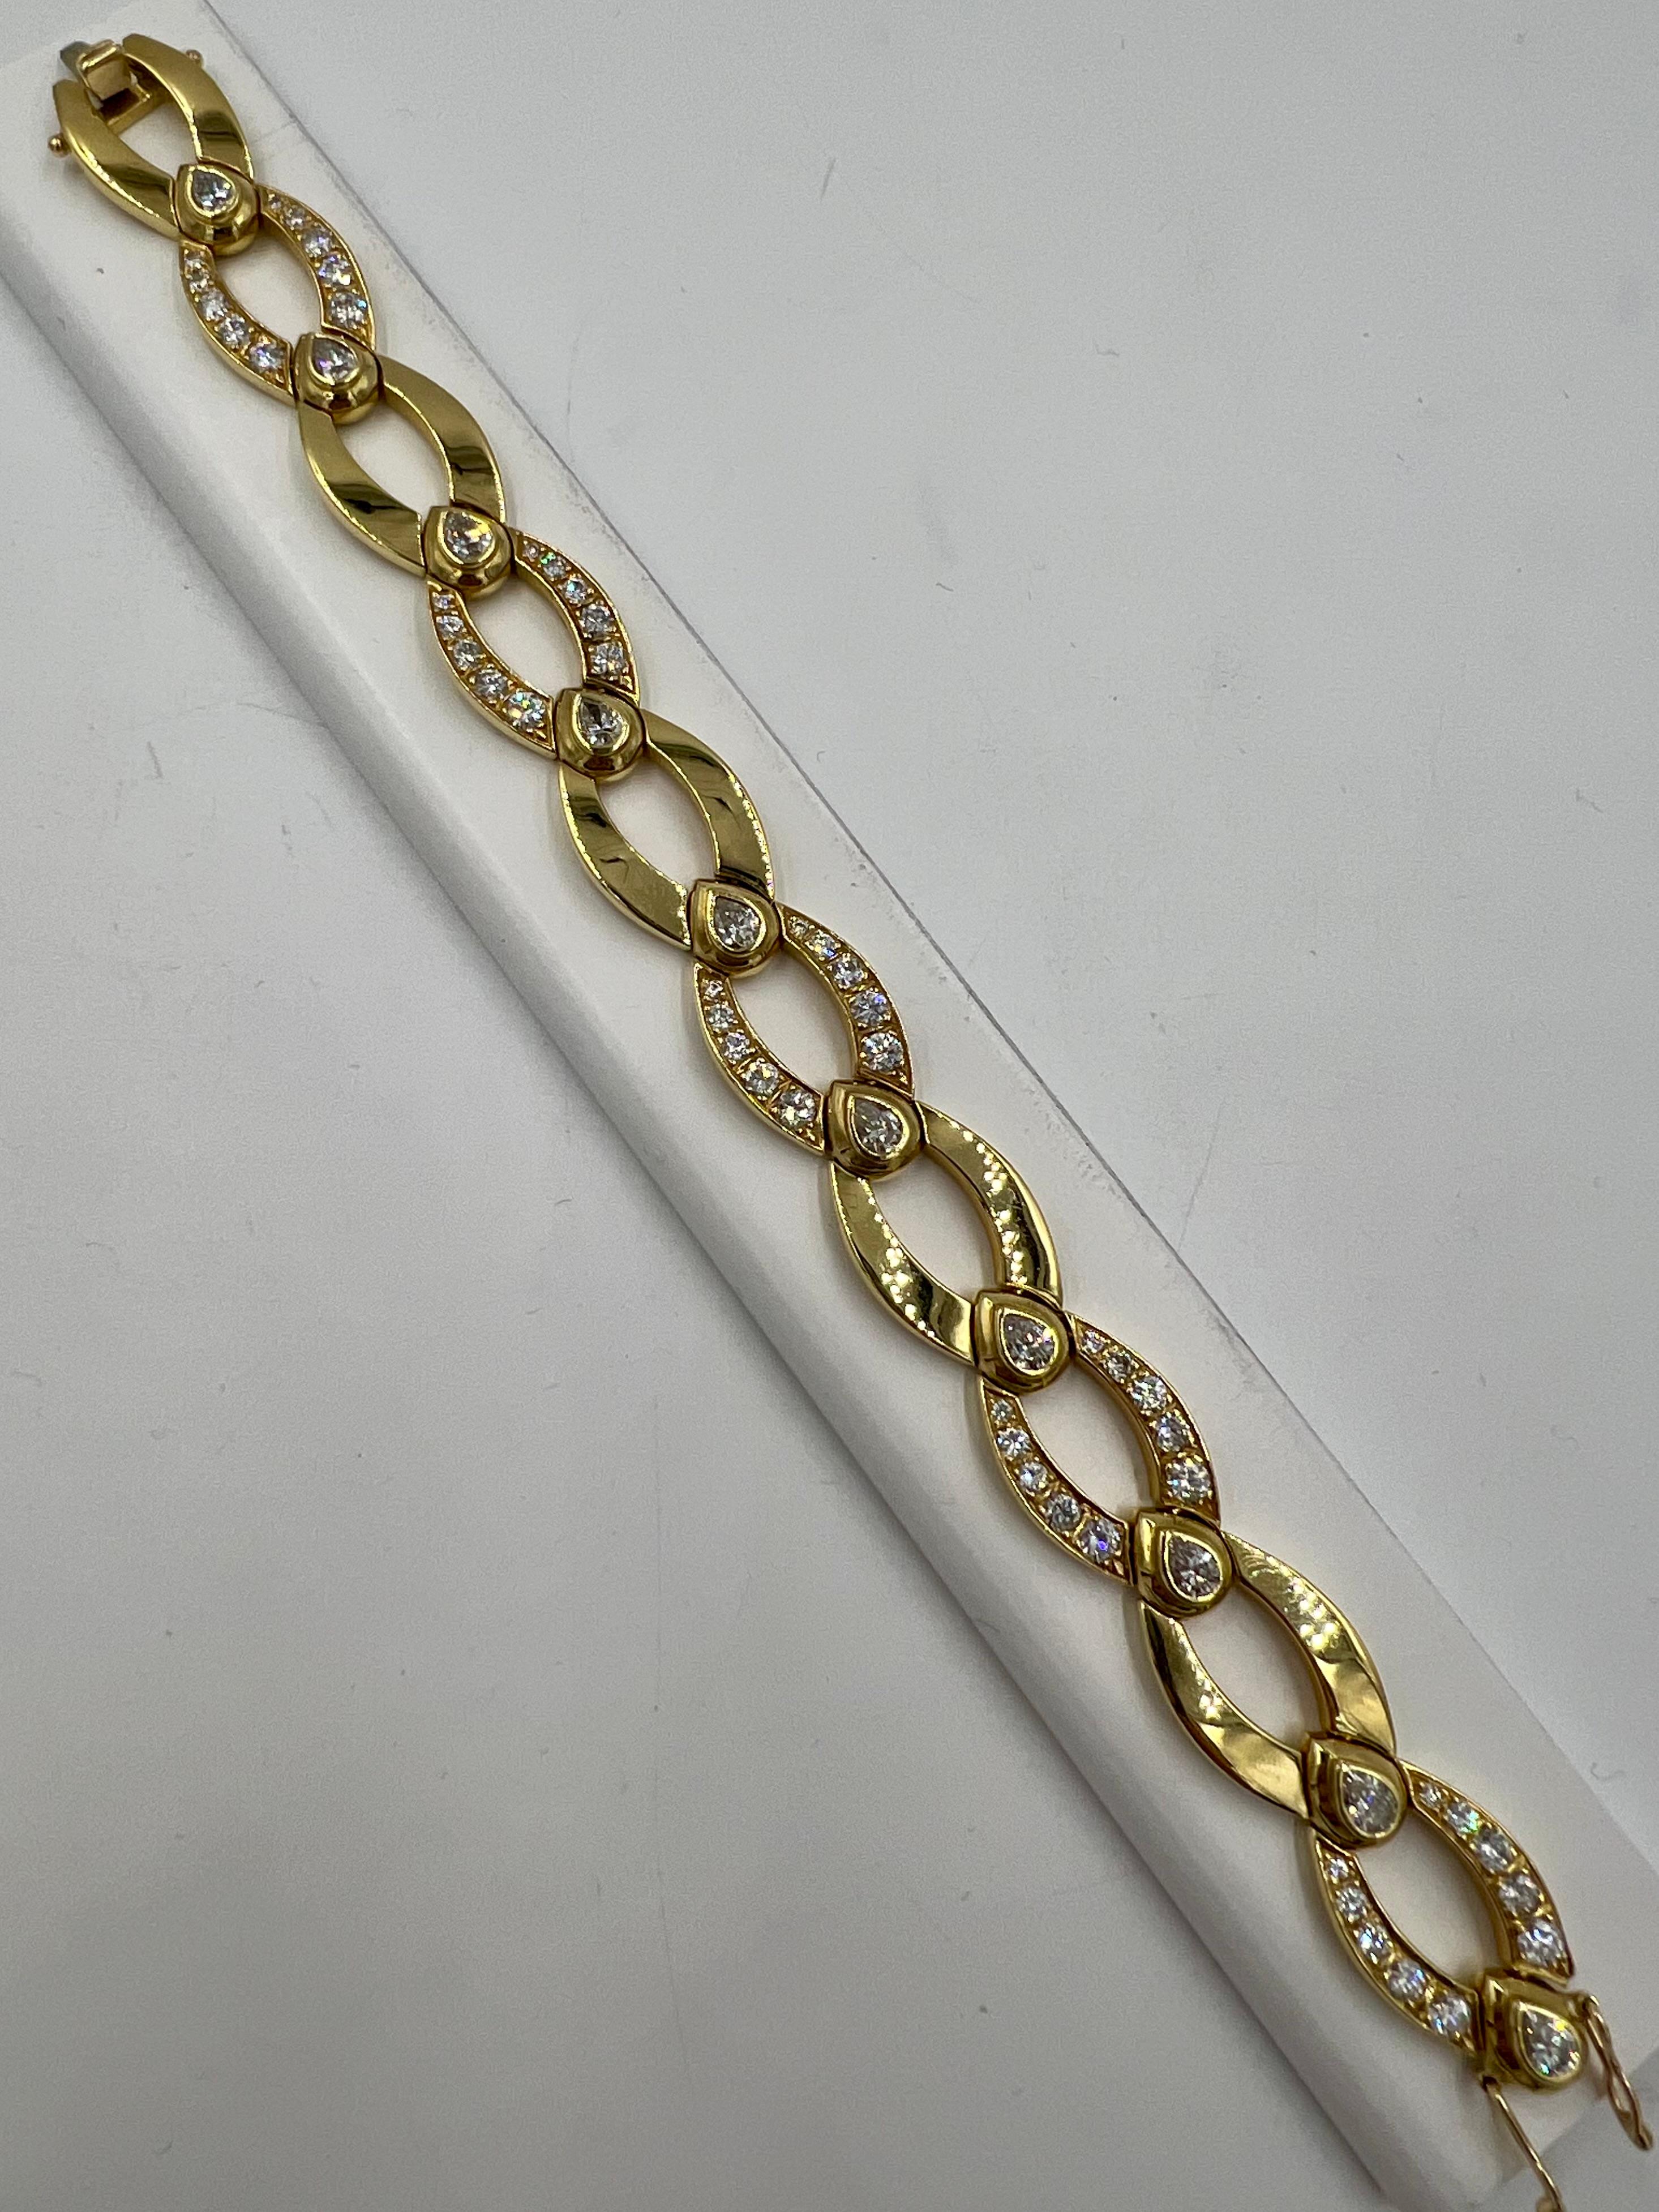 1970s Pear shape and round diamond yellow gold link bracelet.

The 1970s were a time of bold fashion statements and unique jewelry designs. One such piece that epitomized the era was the pear shape and round diamond yellow gold link bracelet. This